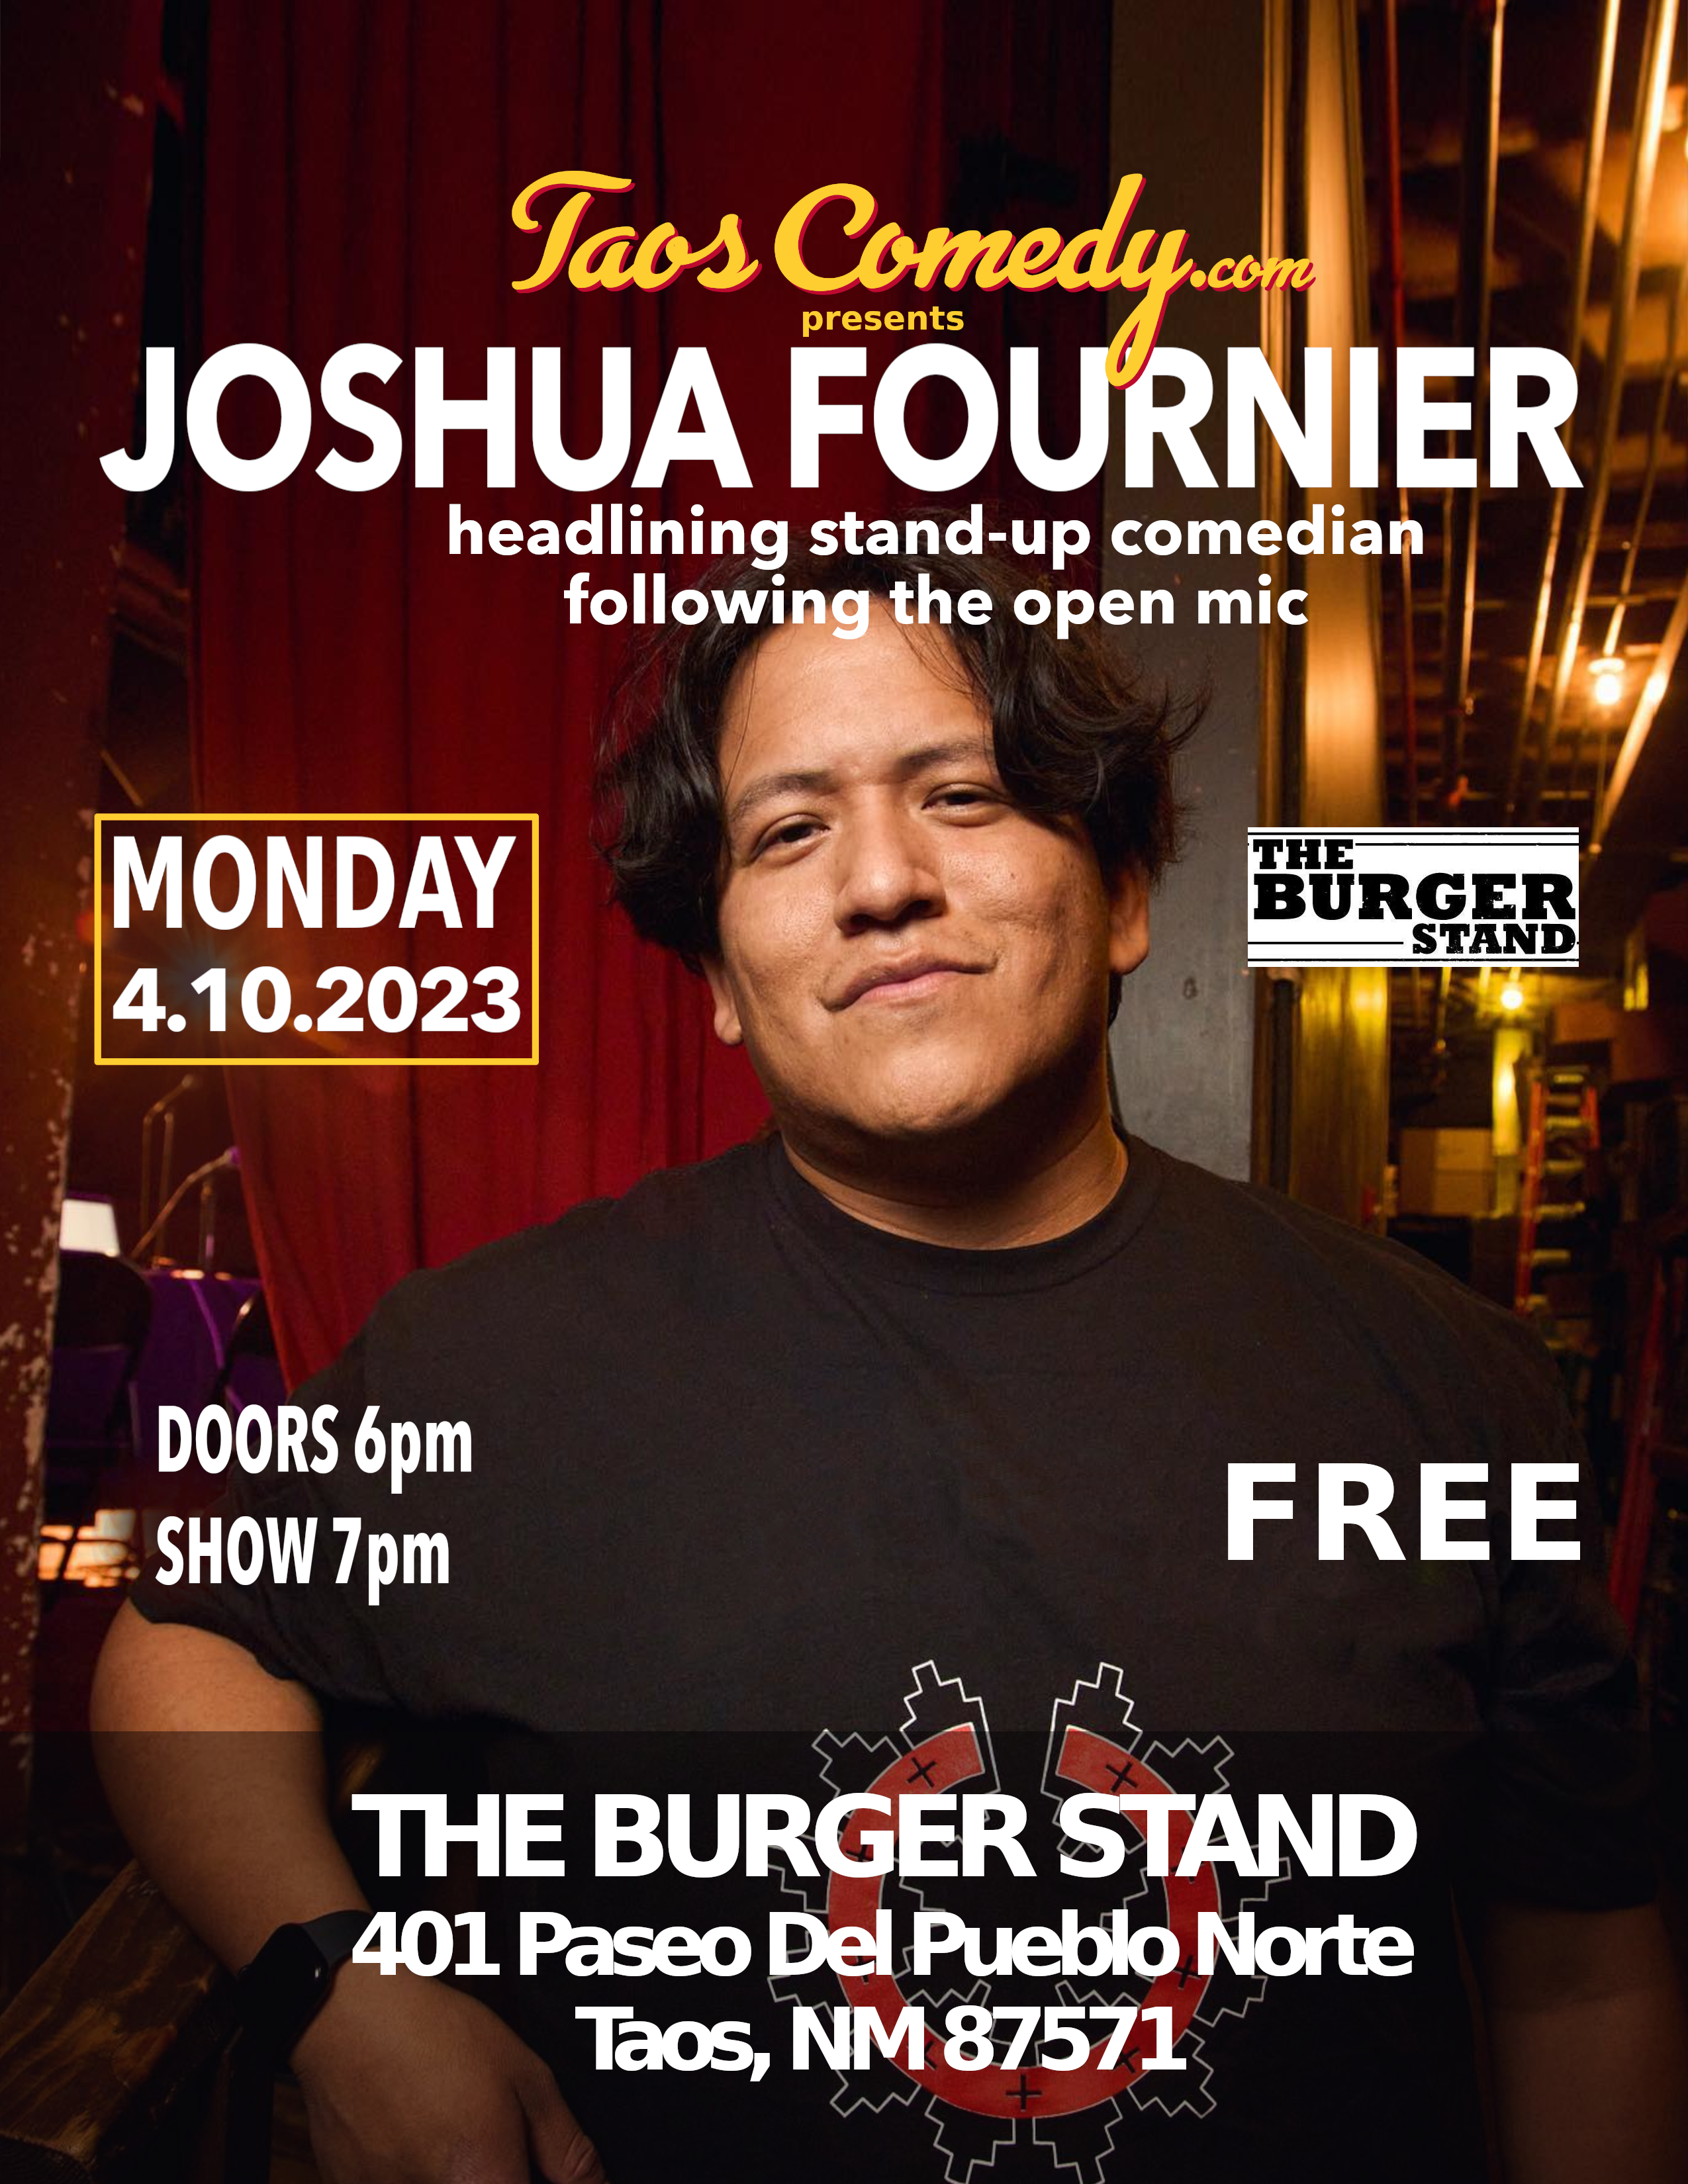 Joshua Fournier headlining after the open mic at The Burger Stand 4/10/2023